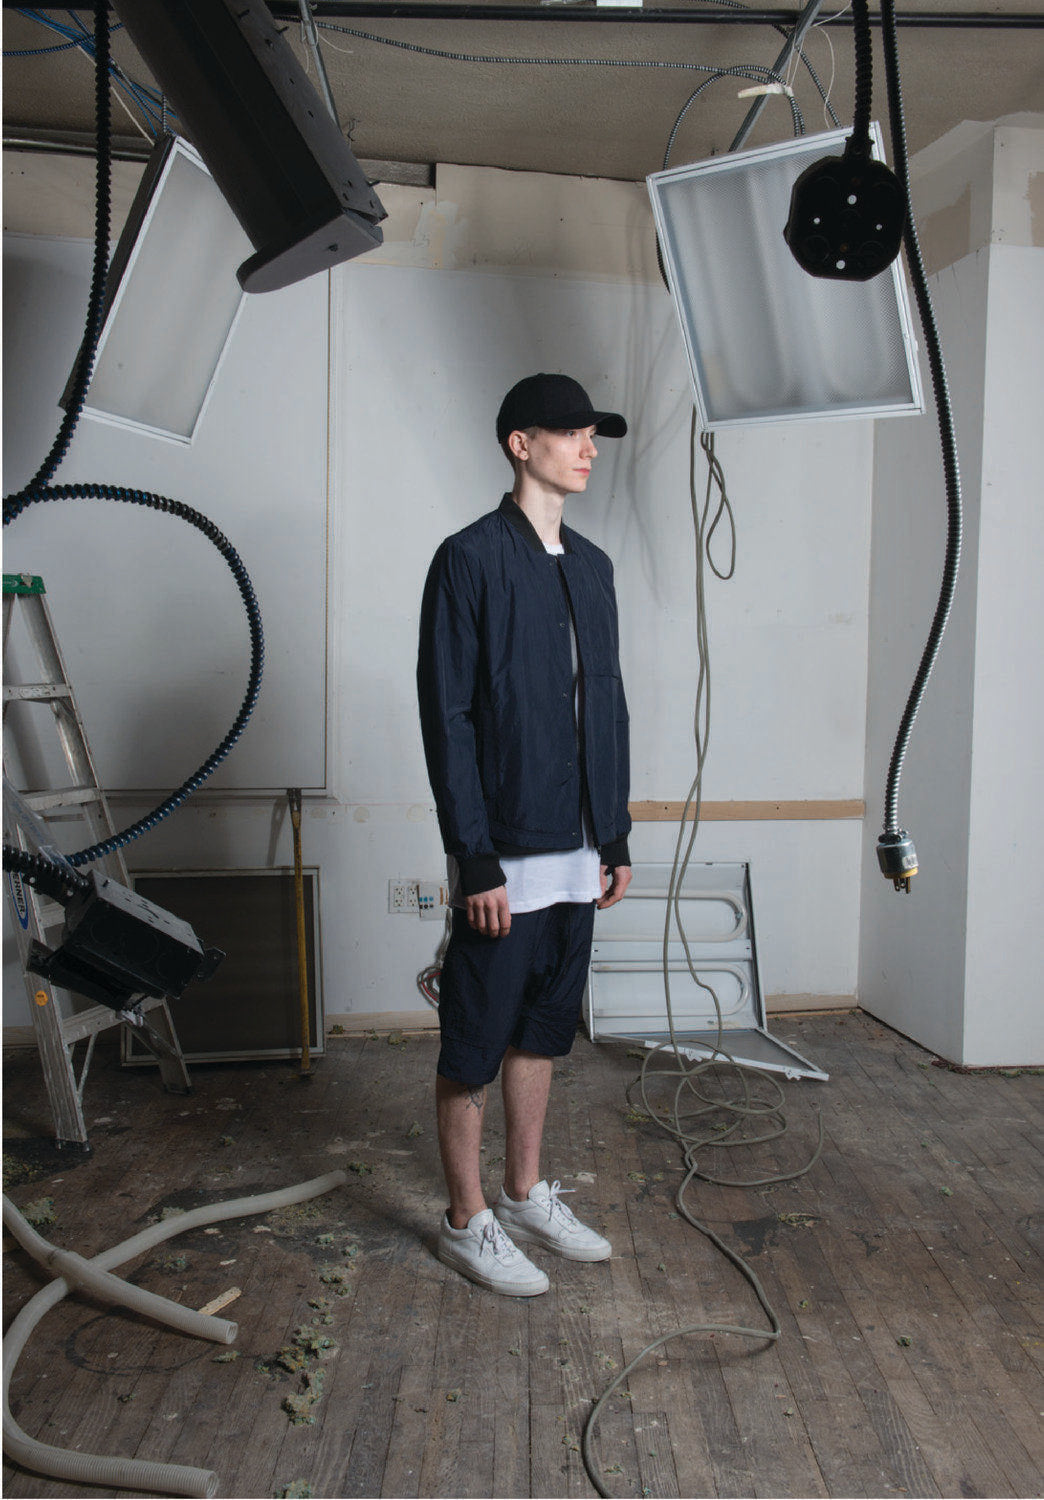 s/s 2016 – Control Sector